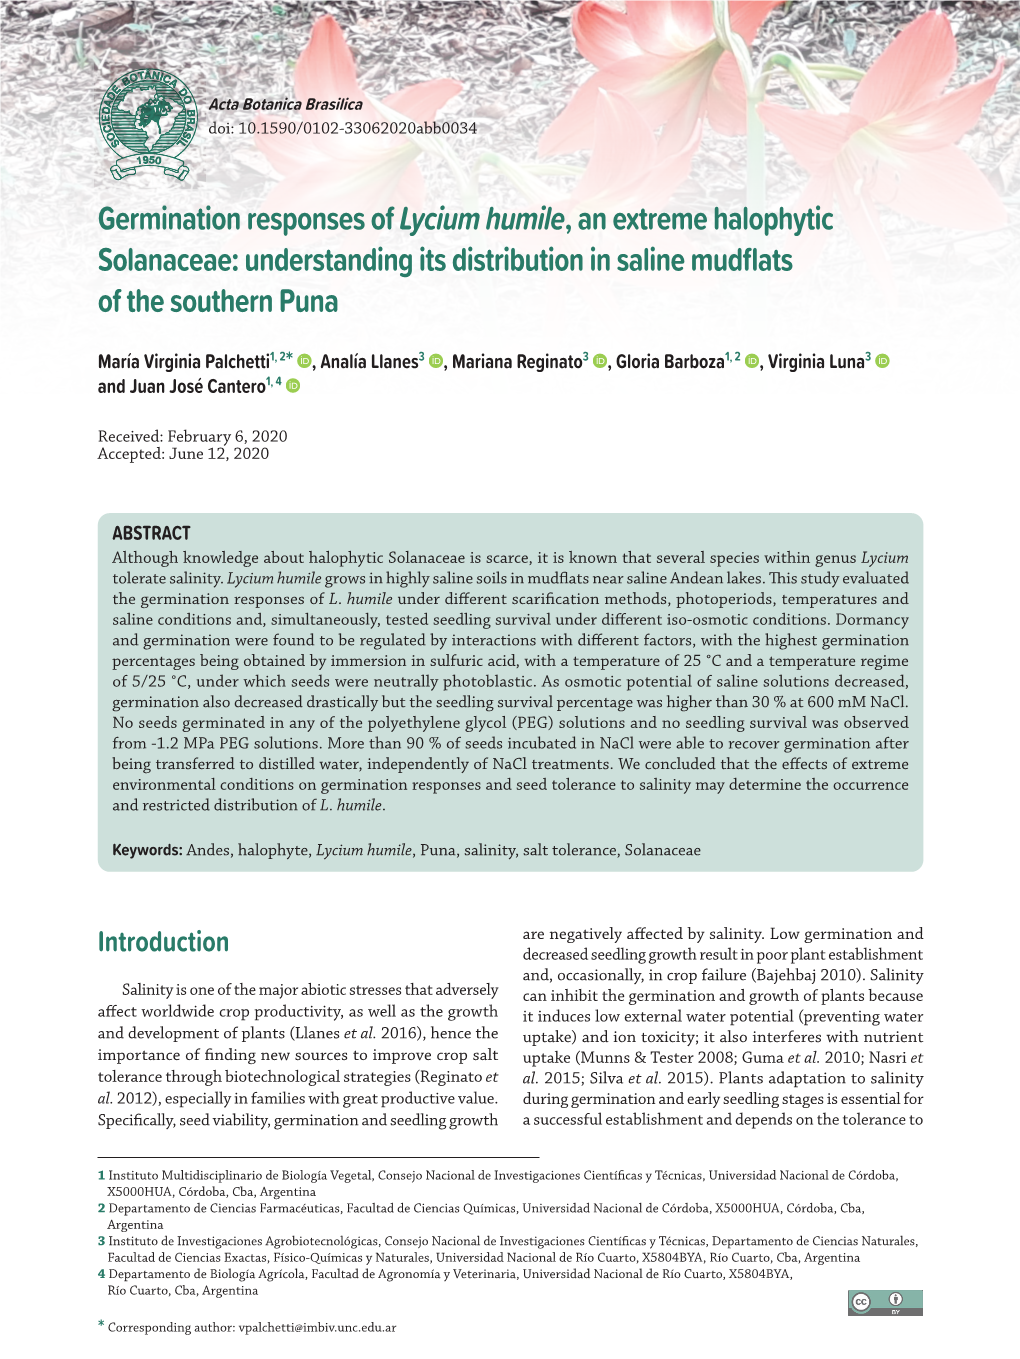 Germination Responses of Lycium Humile, an Extreme Halophytic Solanaceae: Understanding Its Distribution in Saline Mudflats of the Southern Puna